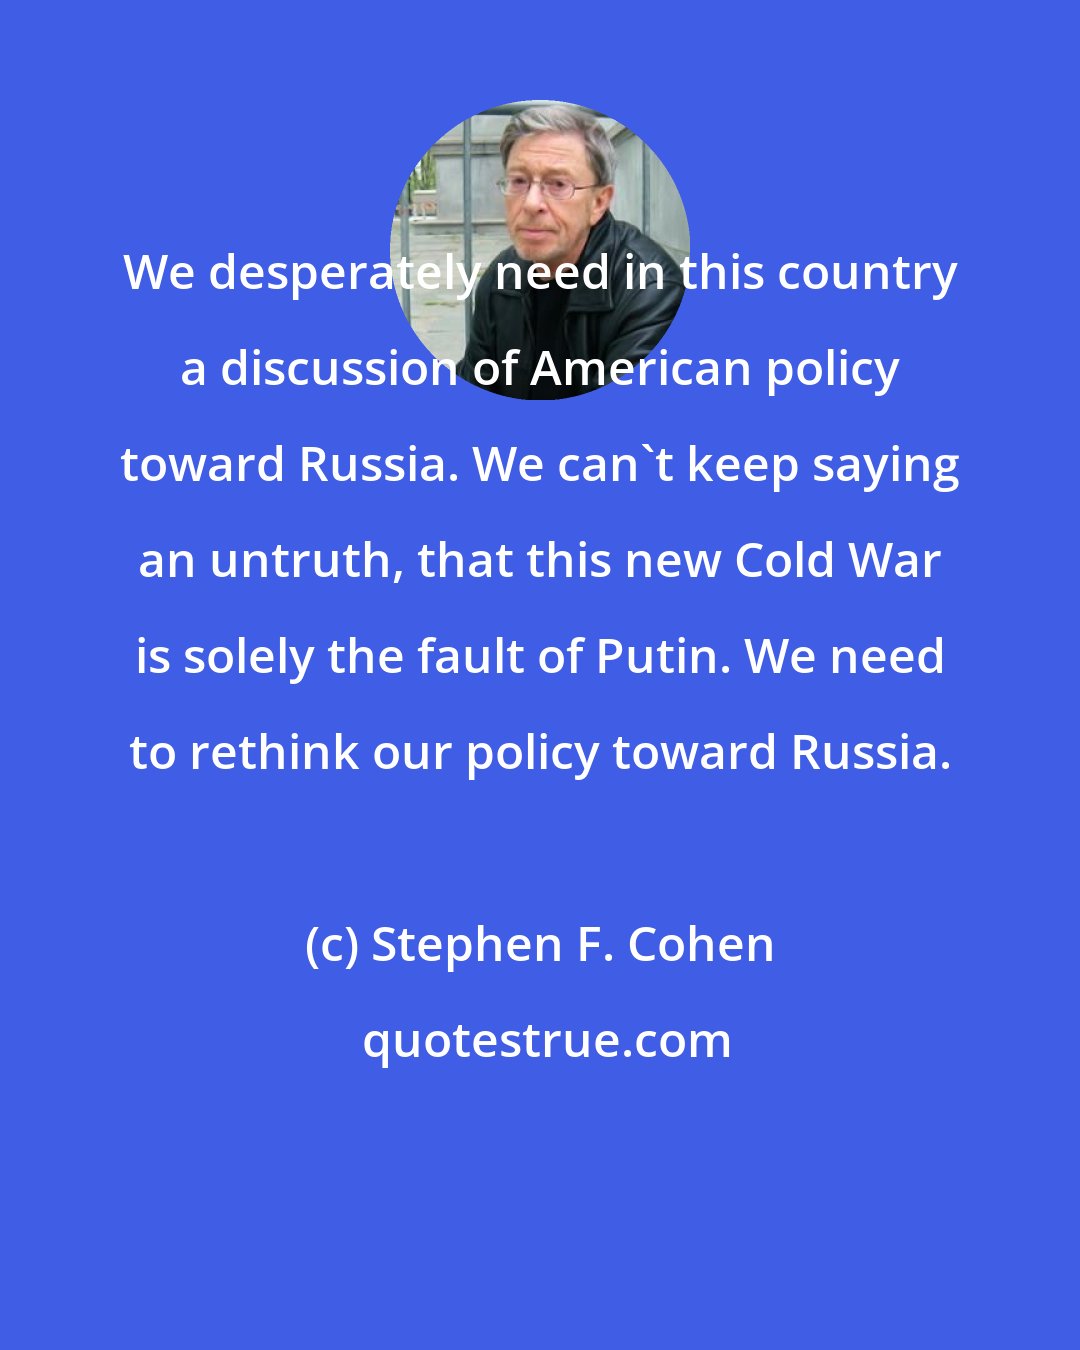 Stephen F. Cohen: We desperately need in this country a discussion of American policy toward Russia. We can't keep saying an untruth, that this new Cold War is solely the fault of Putin. We need to rethink our policy toward Russia.